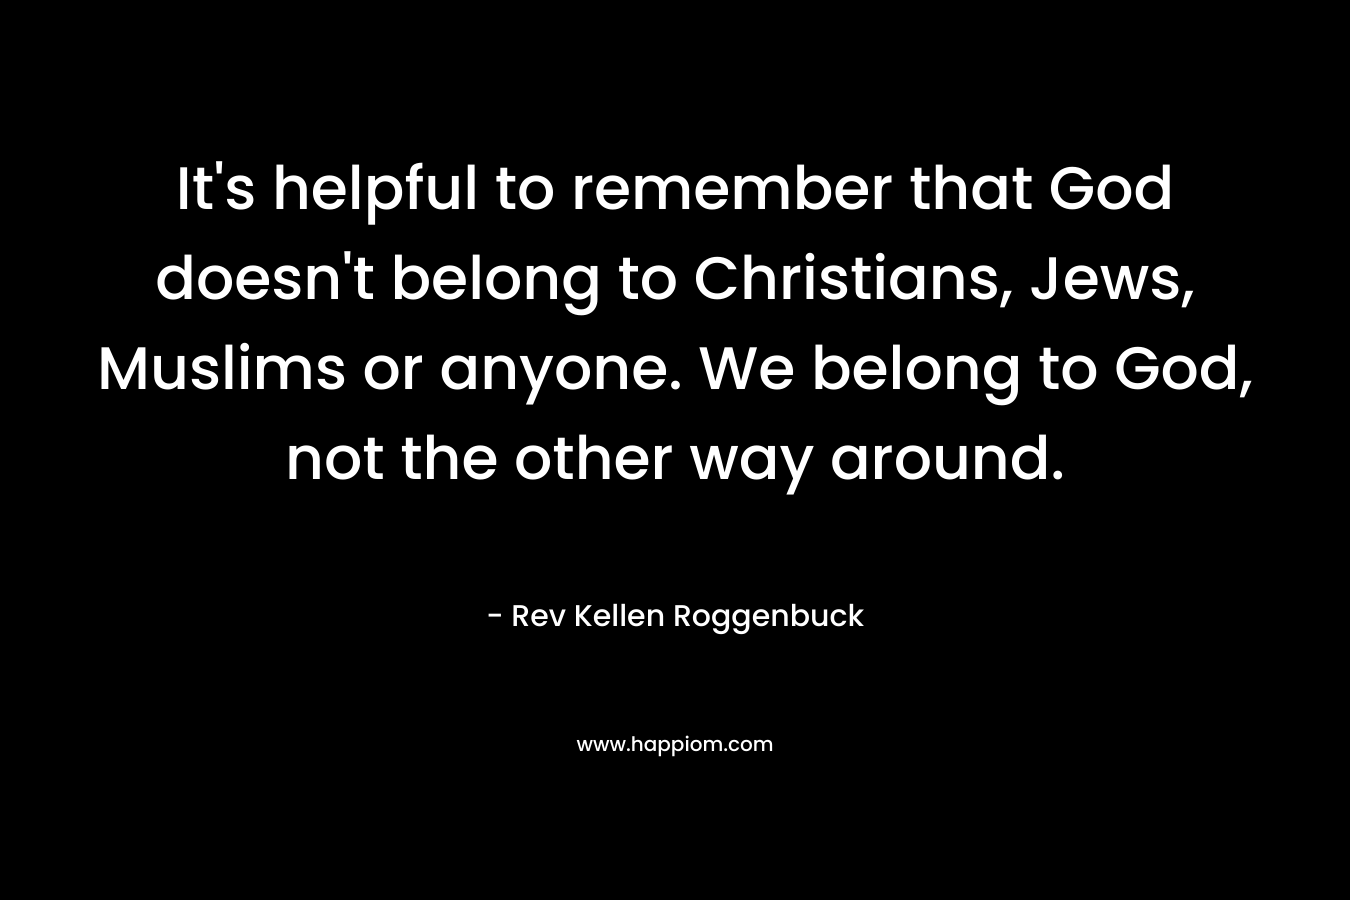 It's helpful to remember that God doesn't belong to Christians, Jews, Muslims or anyone. We belong to God, not the other way around.